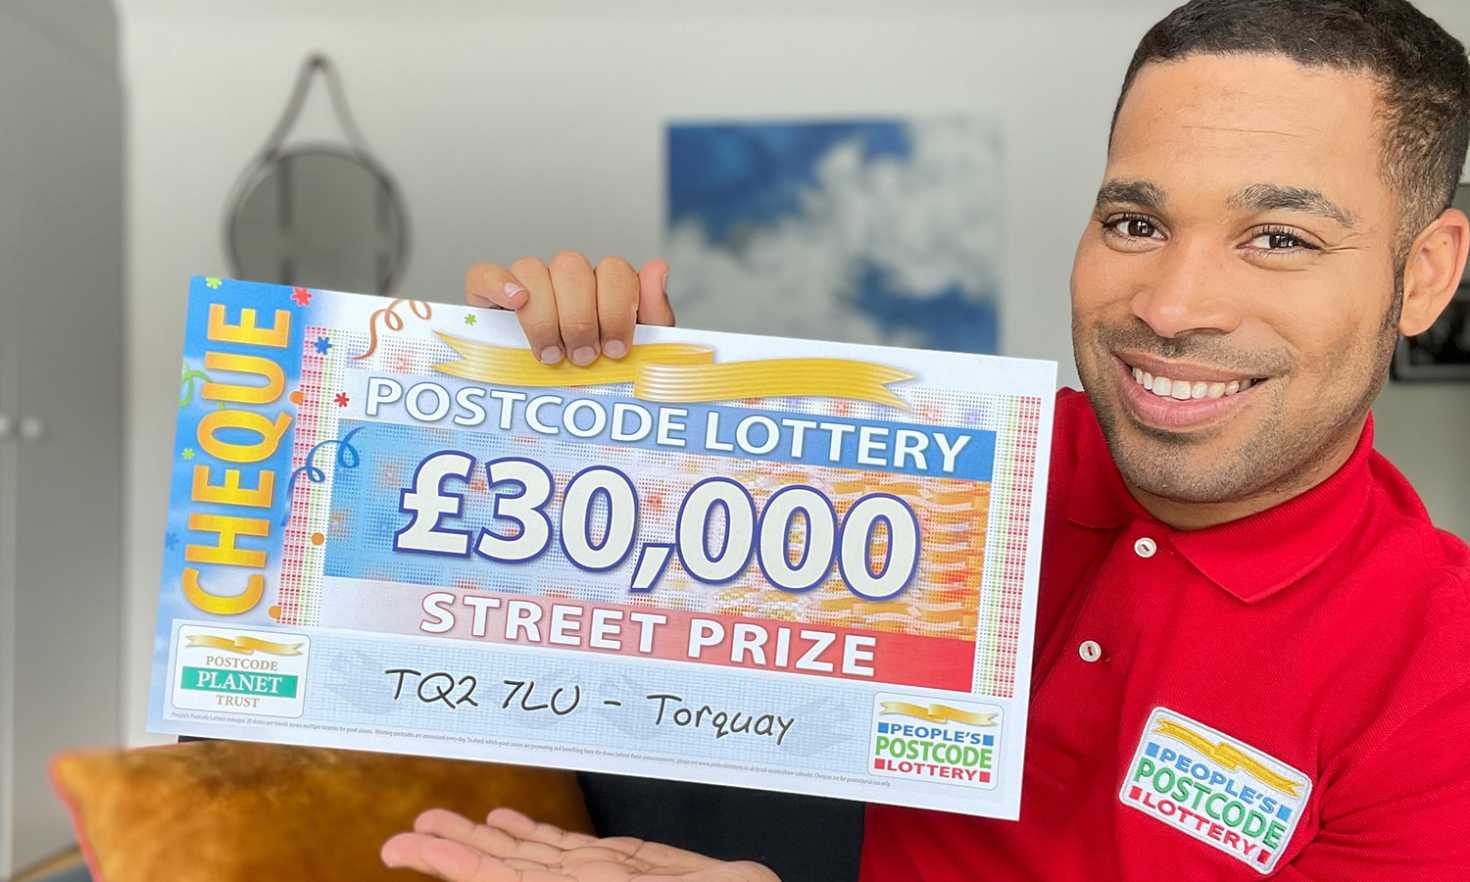 Today's £30,000 Street Prizes are heading to four lucky neighbours in Torquay